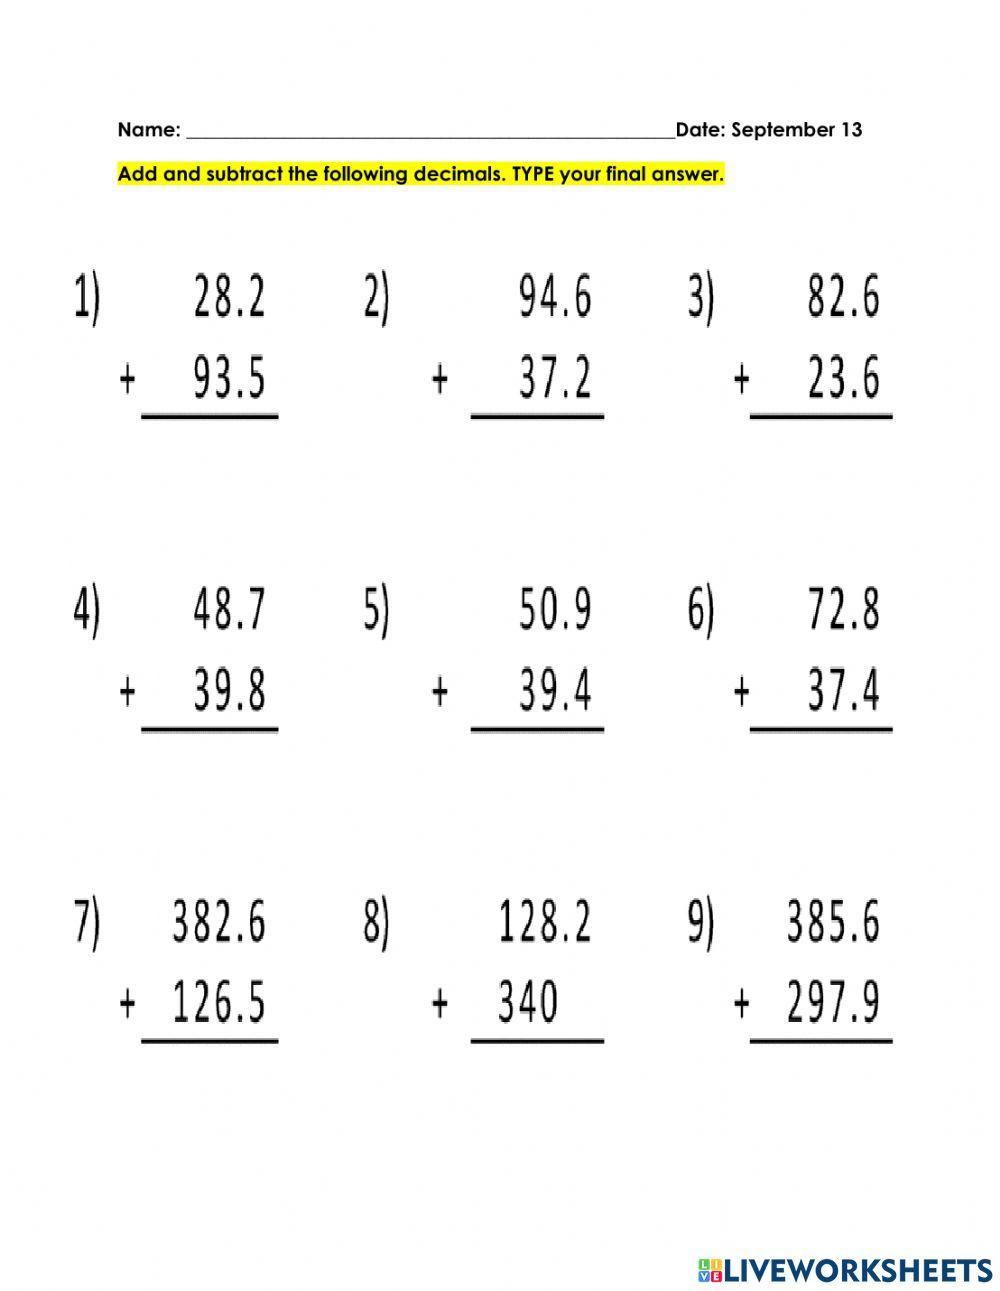 Addition and Subtraction of Decimals 9.13